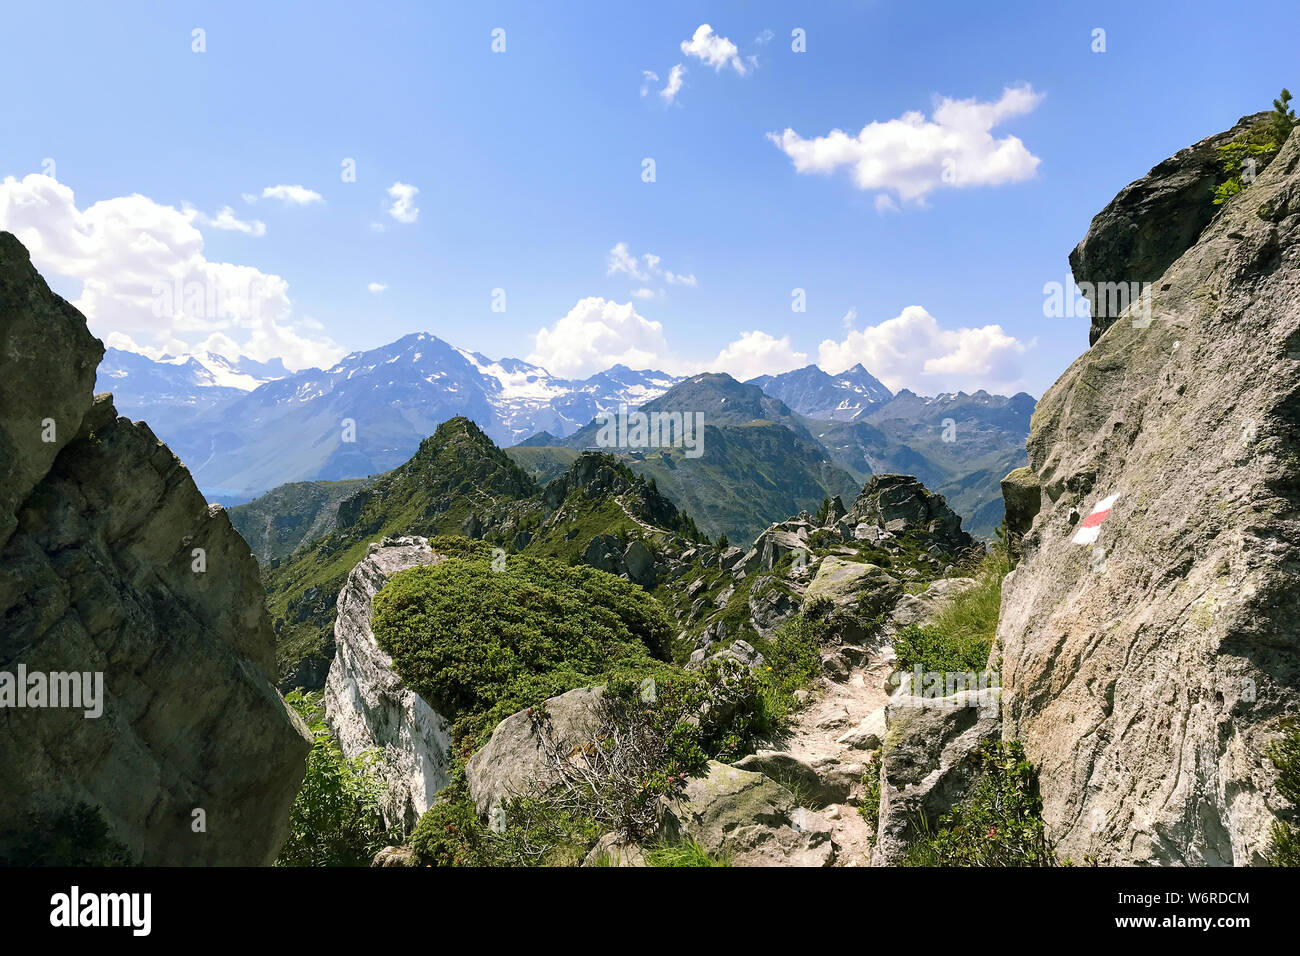 View of the Alpine mountains in Switzerland against a blue sky with white clouds on a bright Sunny day. Stock Photo